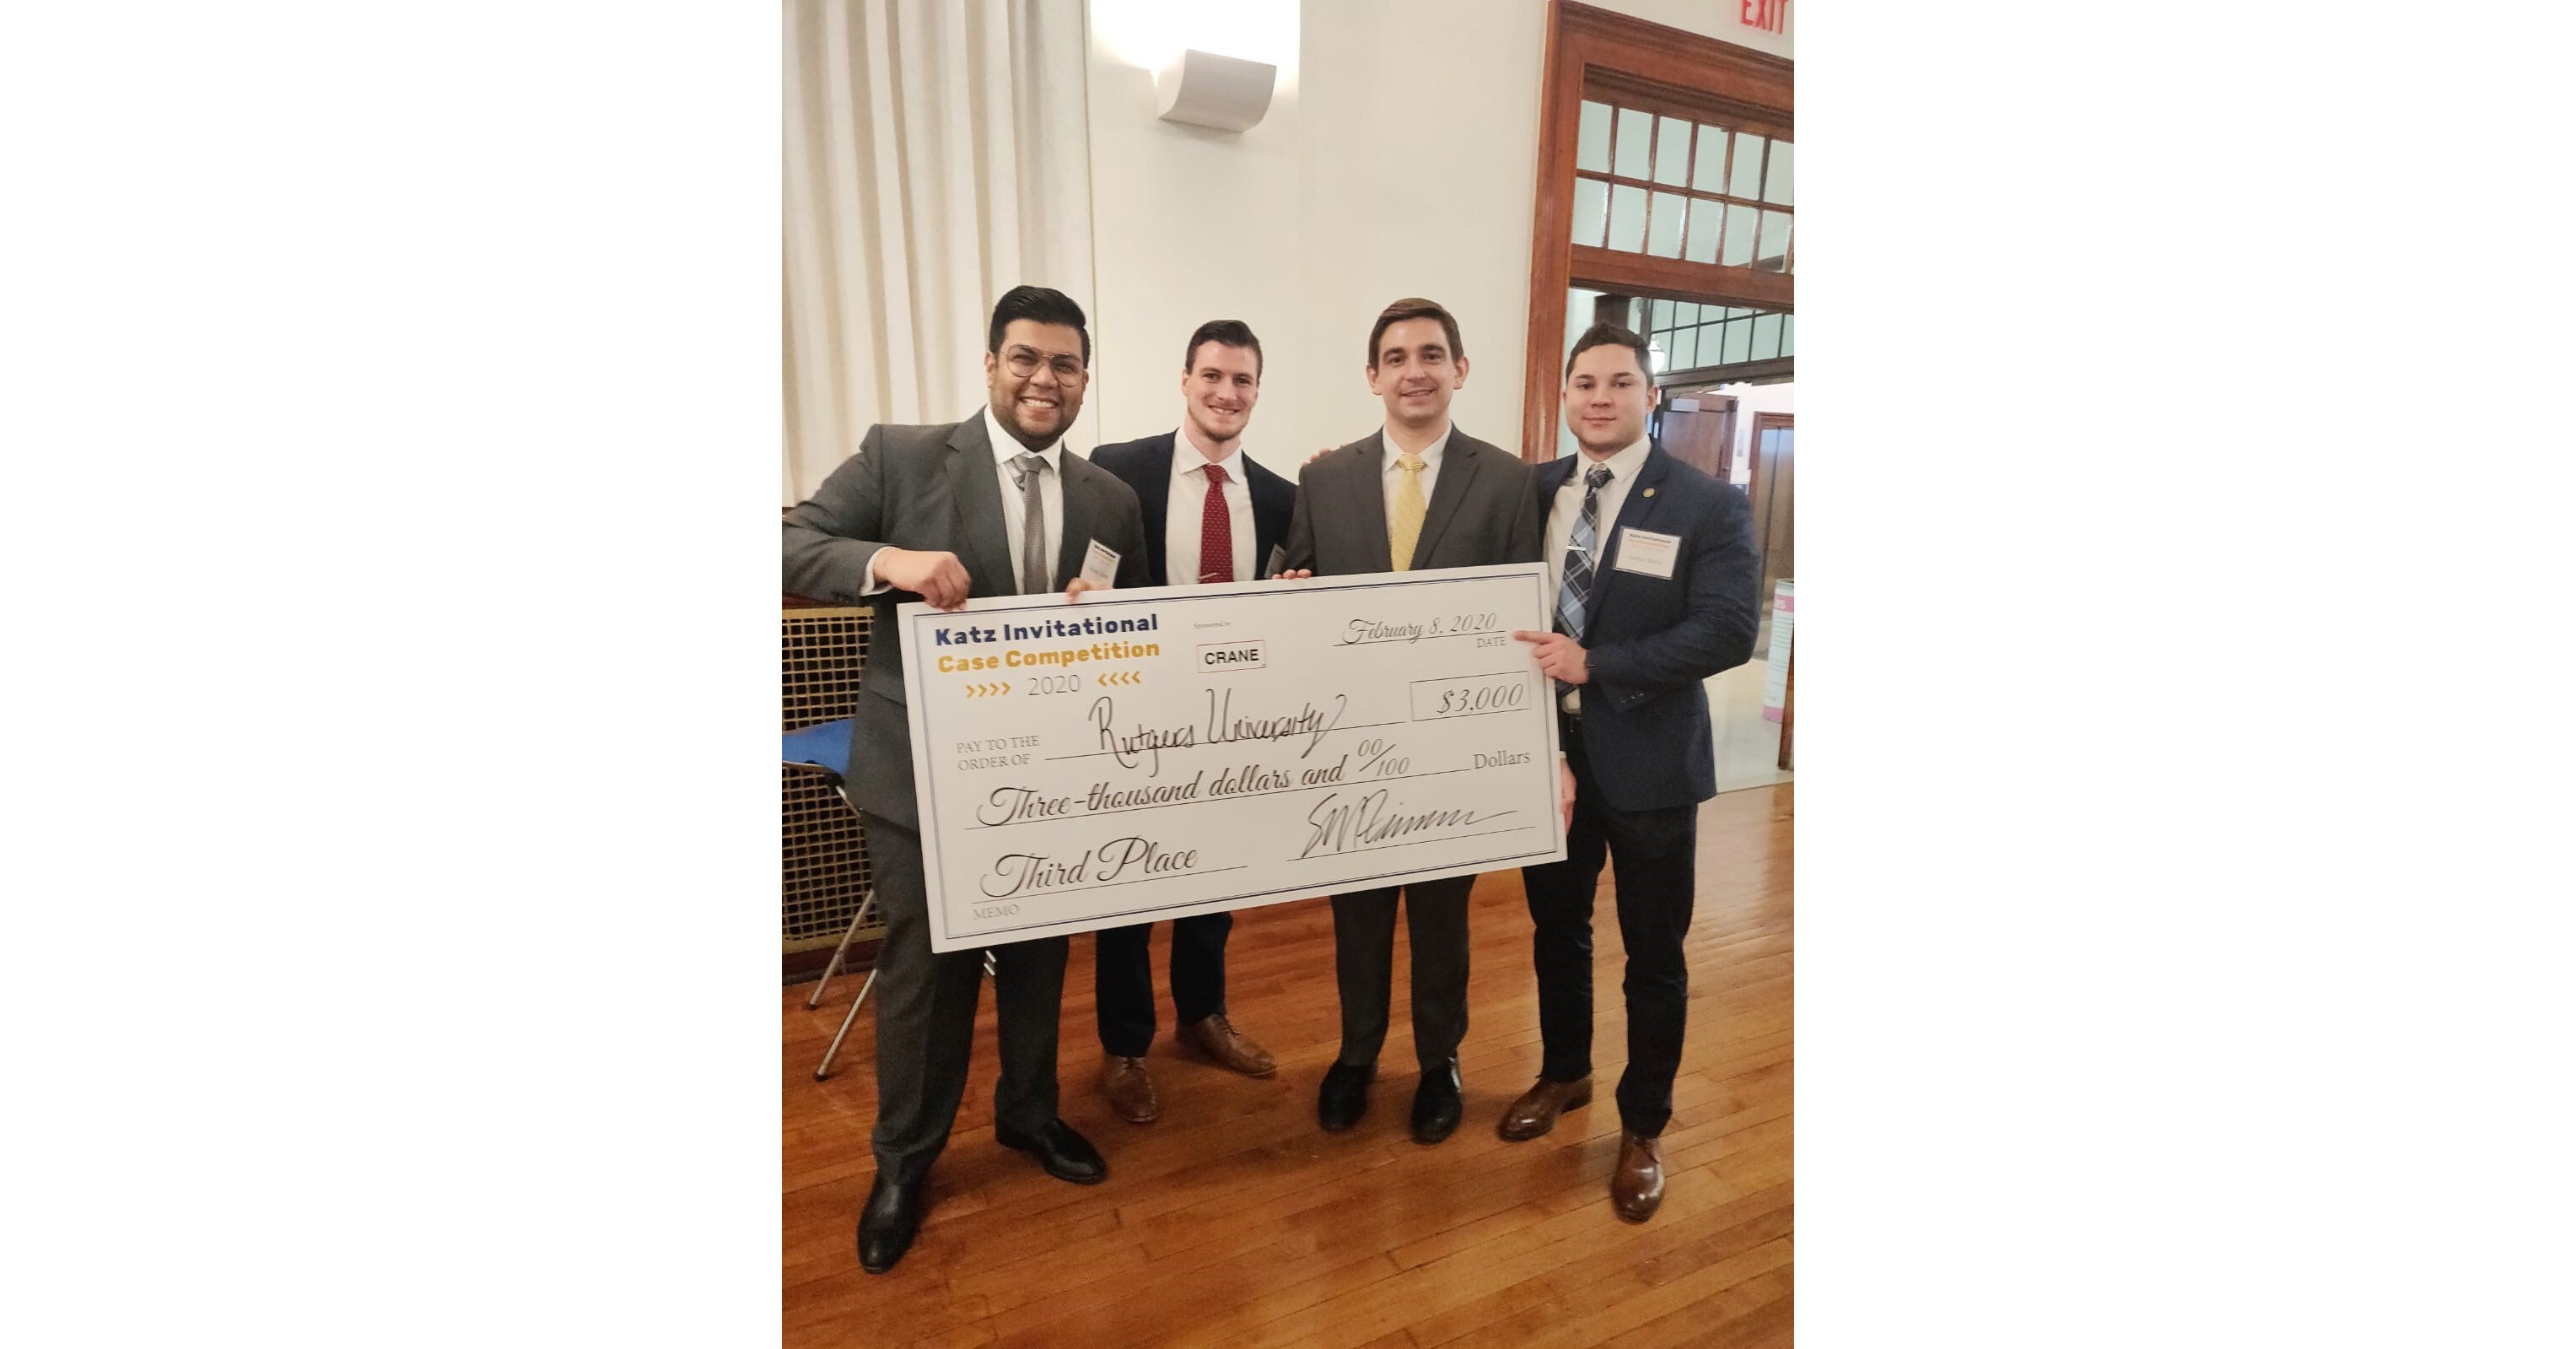 Rutgers MBA students are top winners in case competitions that test